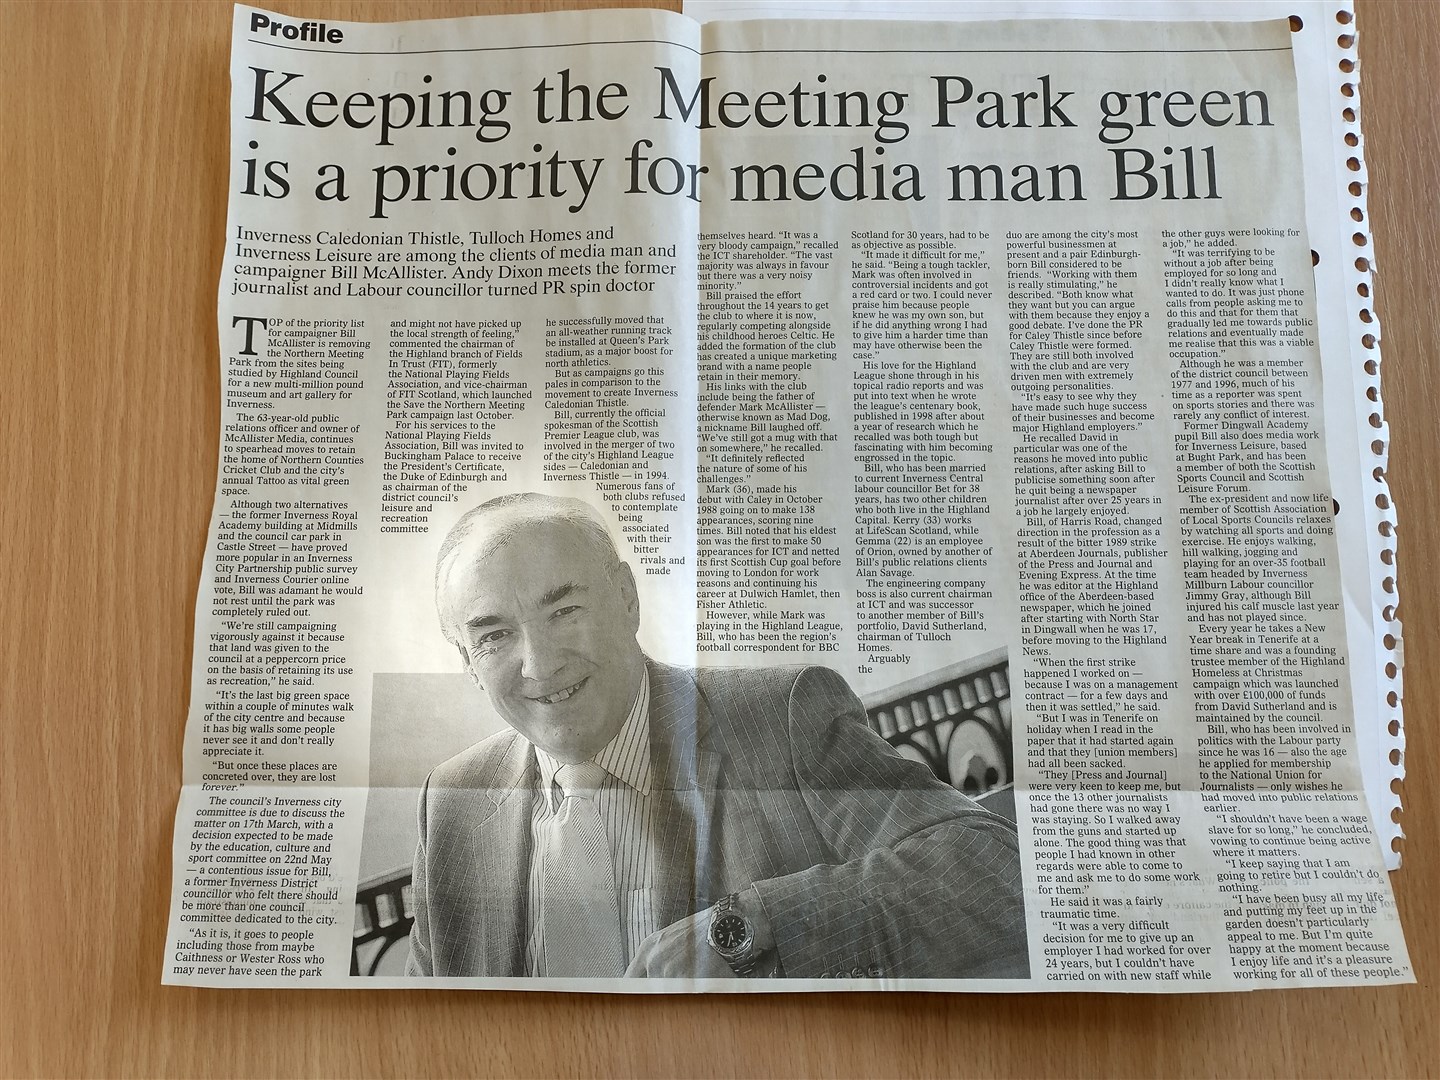 The profile interview with Bill McAllister was written by Andy Dixon in March 2008.